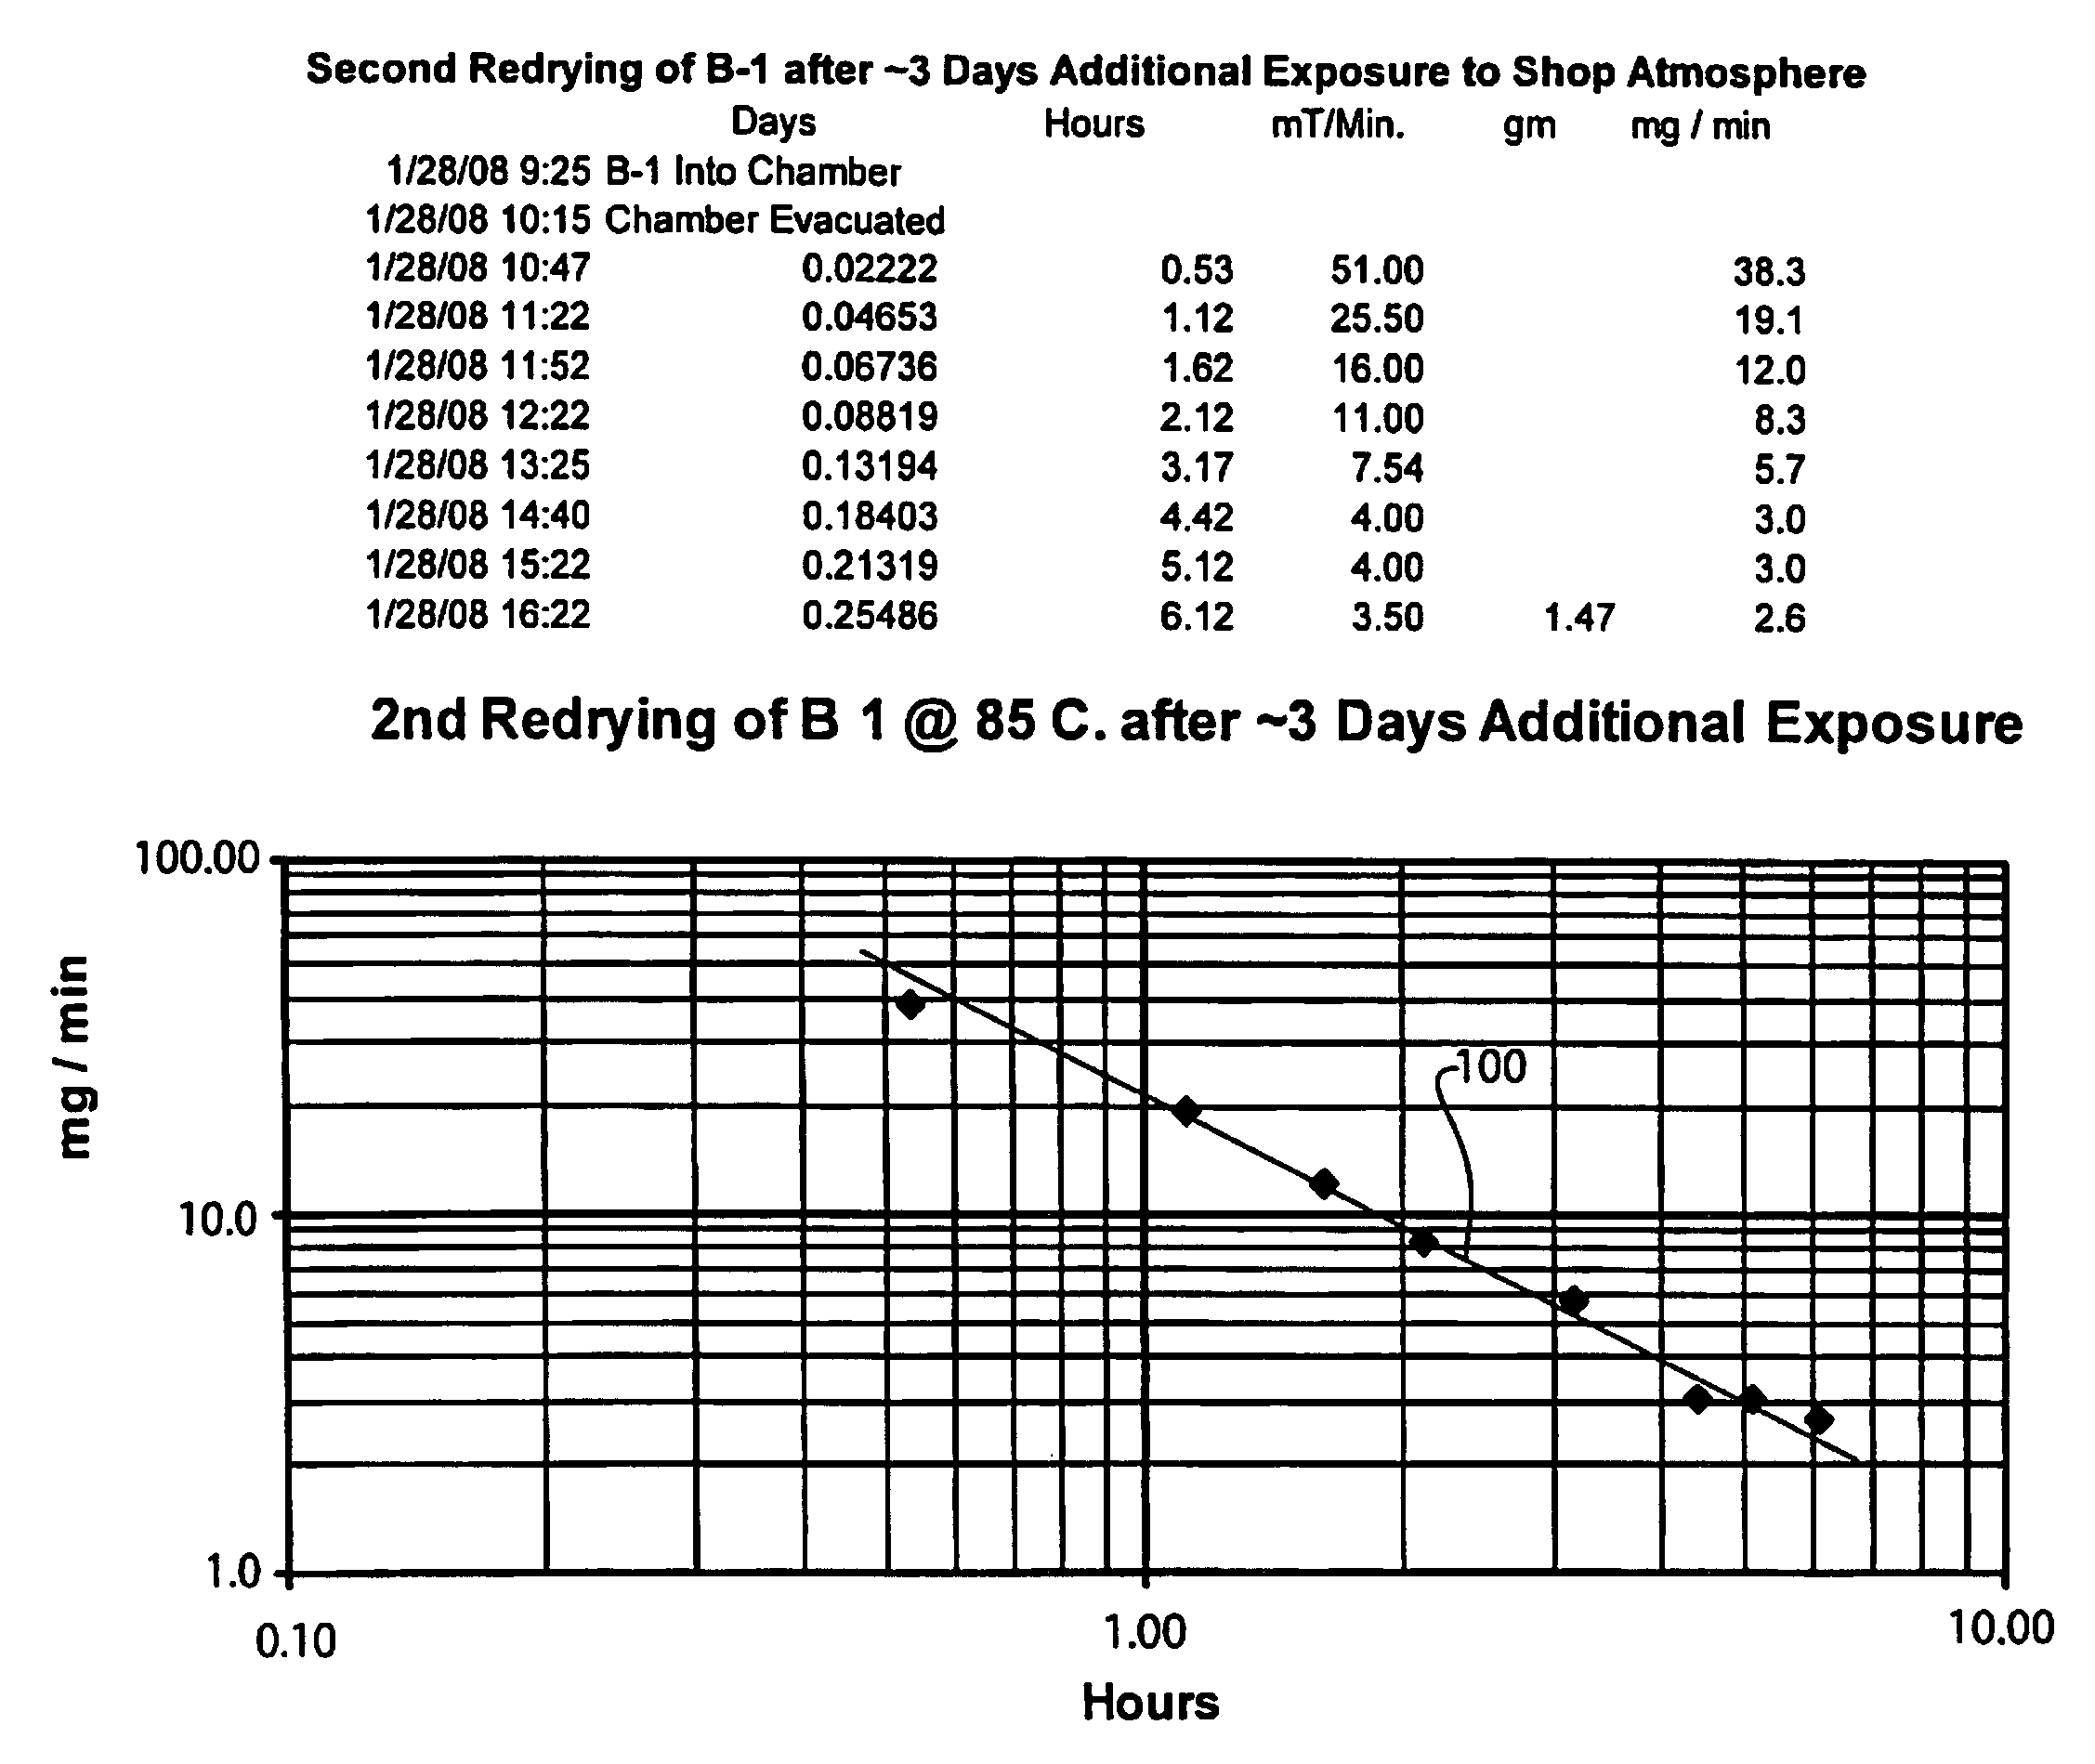 Method for reconditioning FCR APG-68 tactical radar units